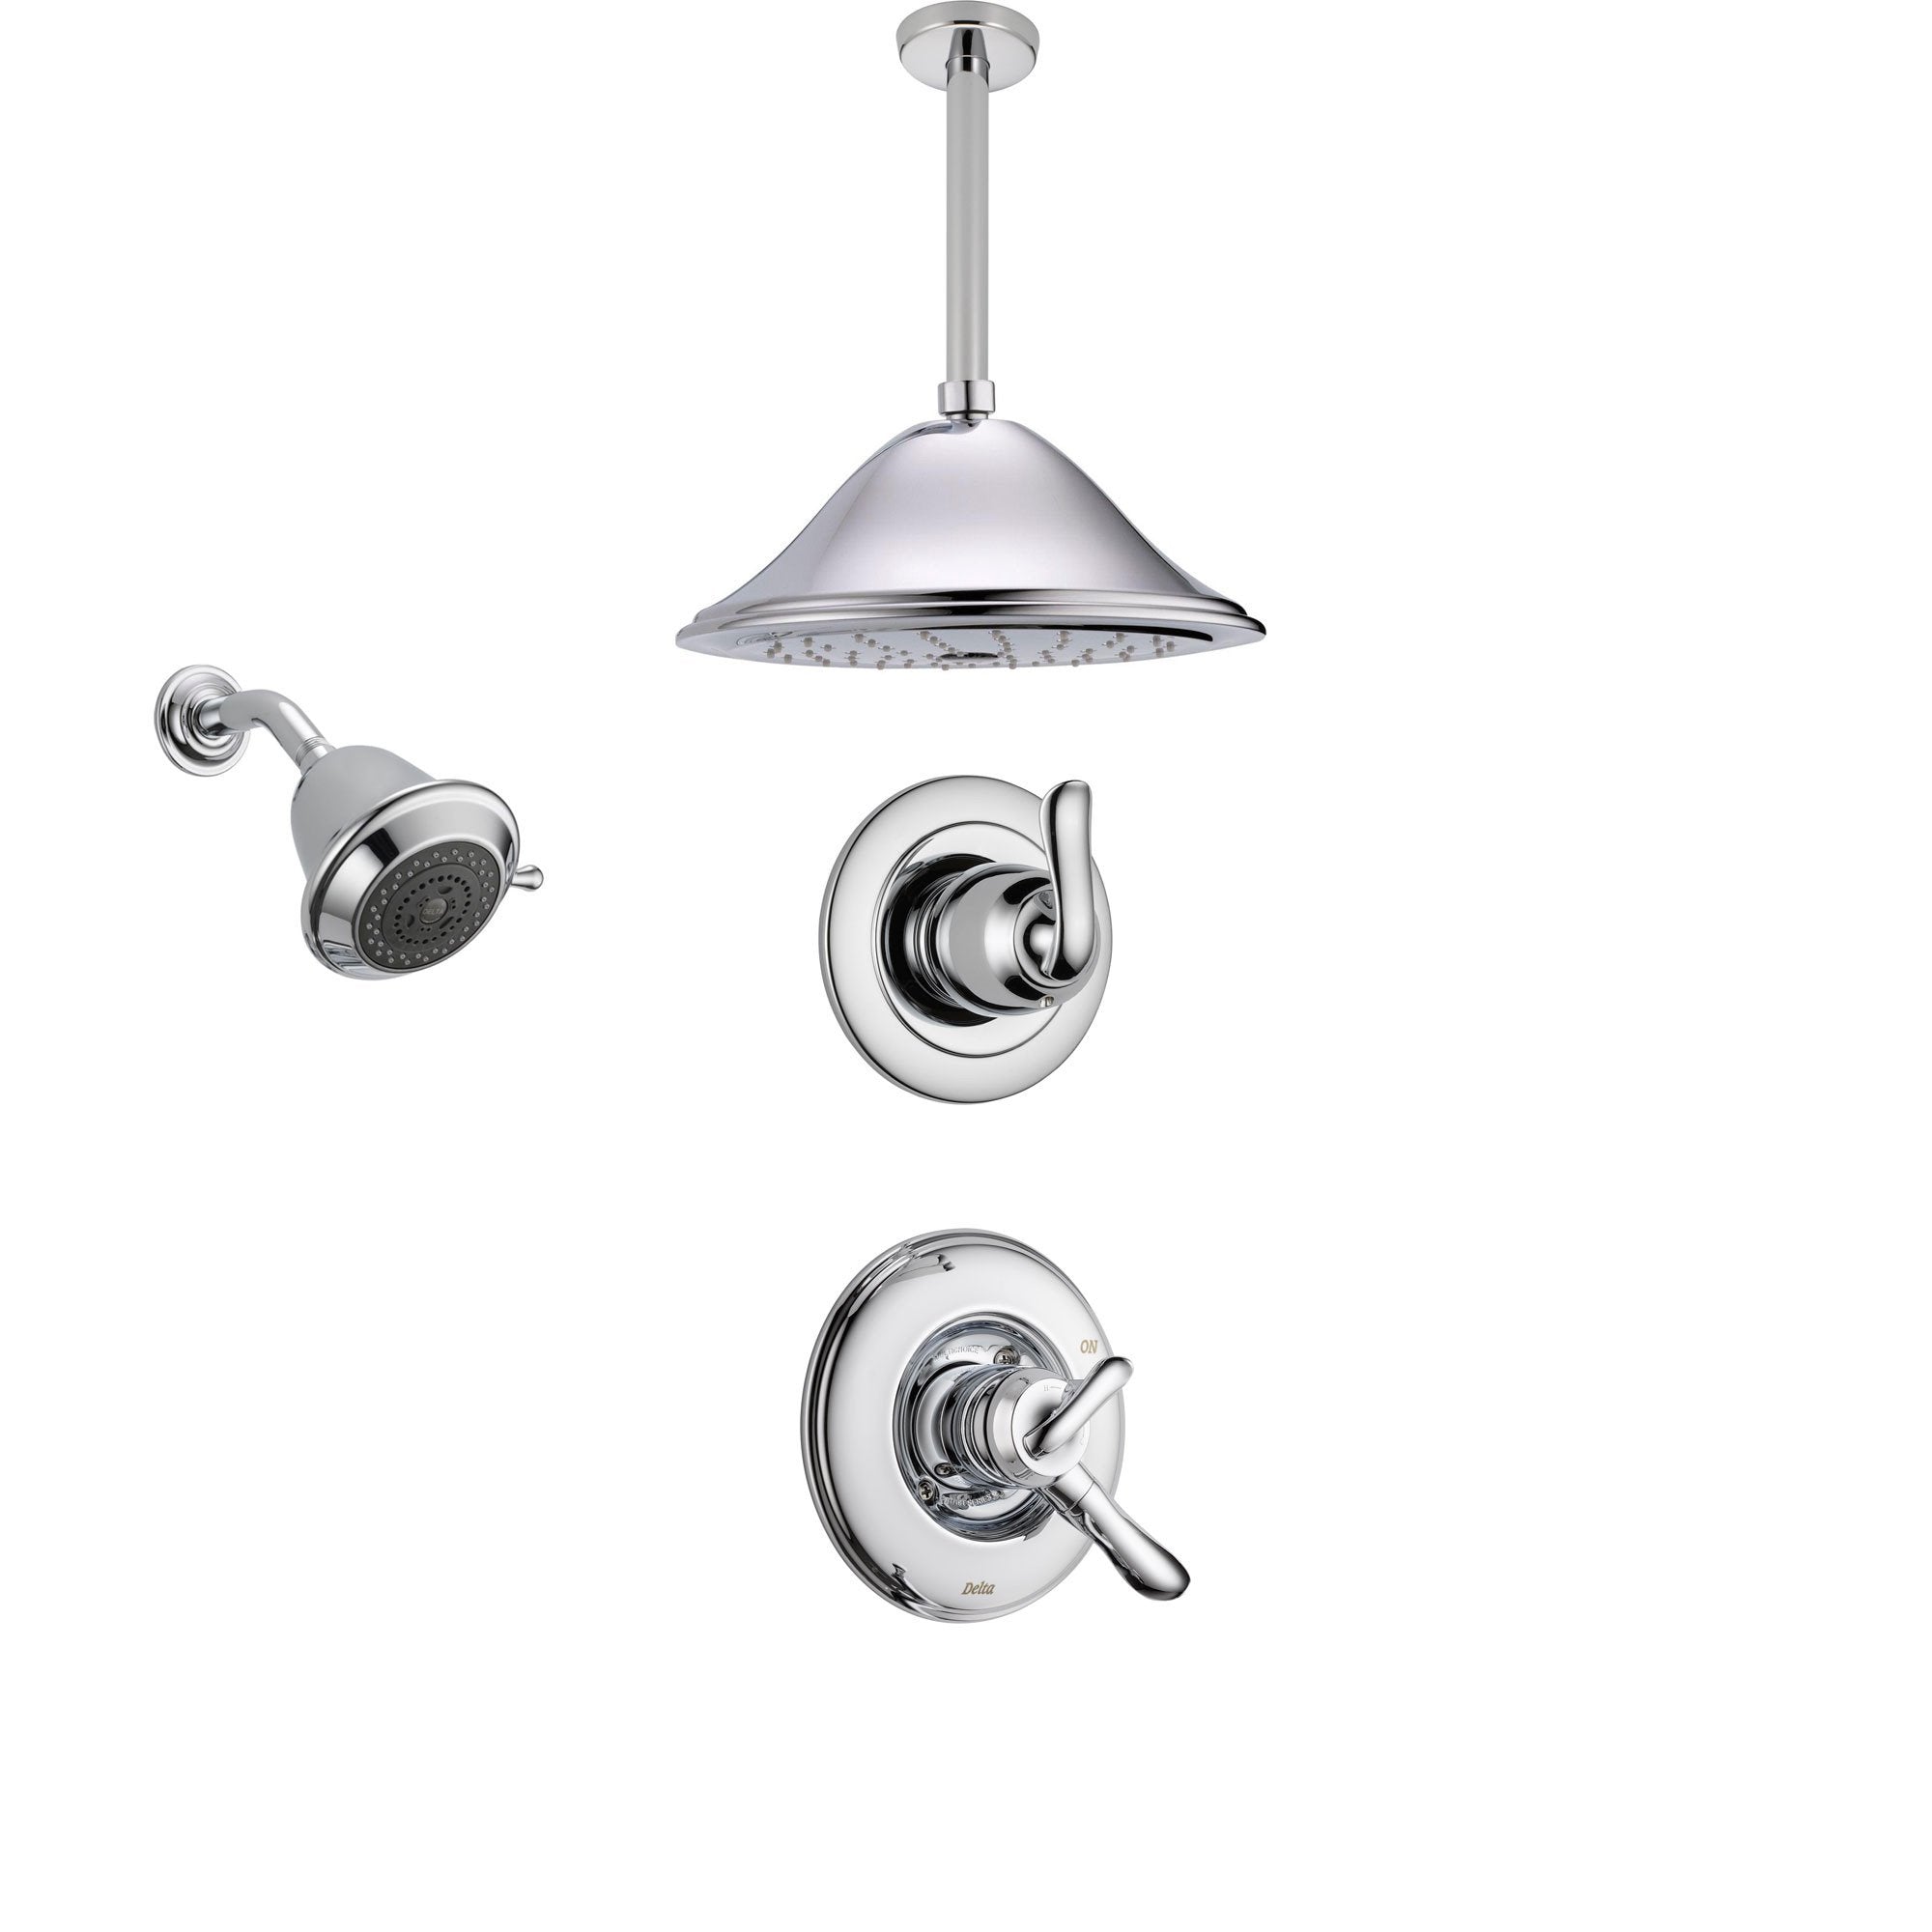 Delta Linden Chrome Shower System With Dual Control Shower Handle 3 Setting Diverter Large Ceiling Mount Rain Shower Head And Wall Mount Showerhead